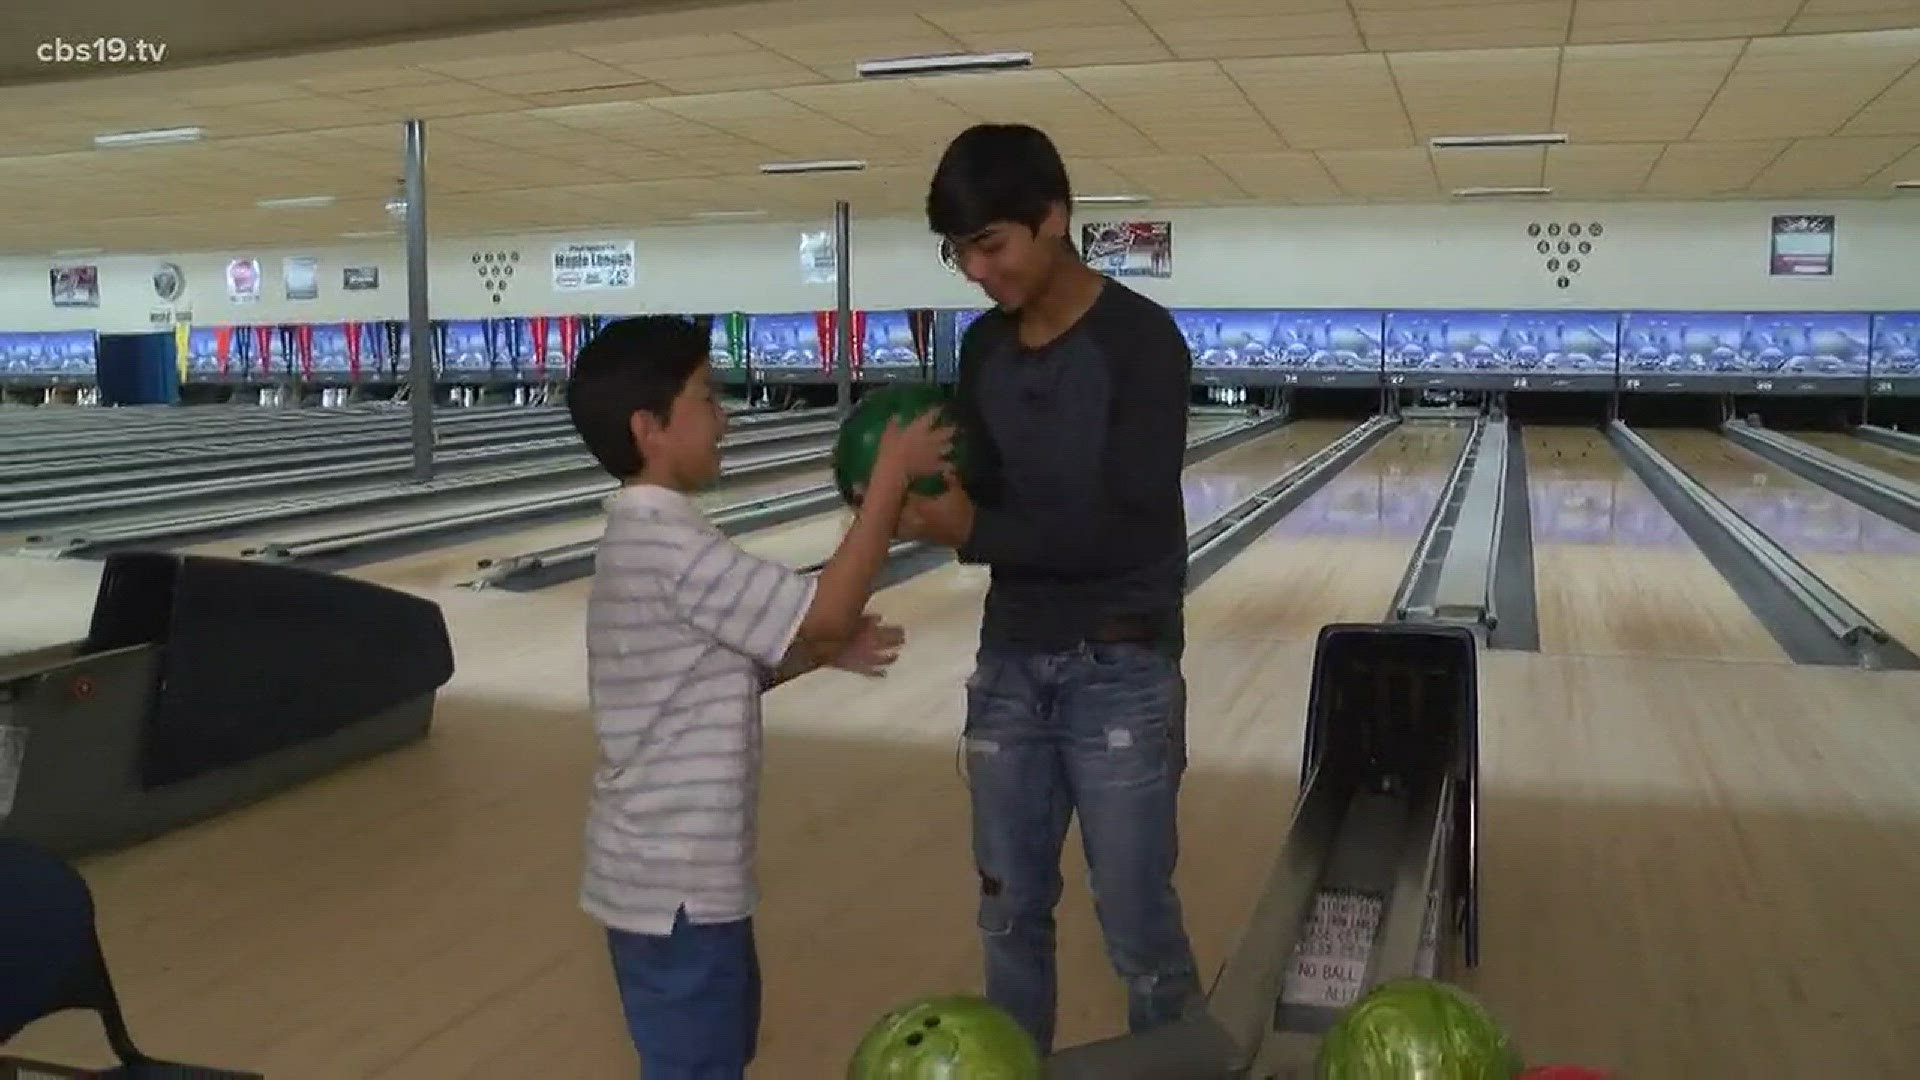 Two brothers hope to be adopted into the same family who likes to be active like they do.